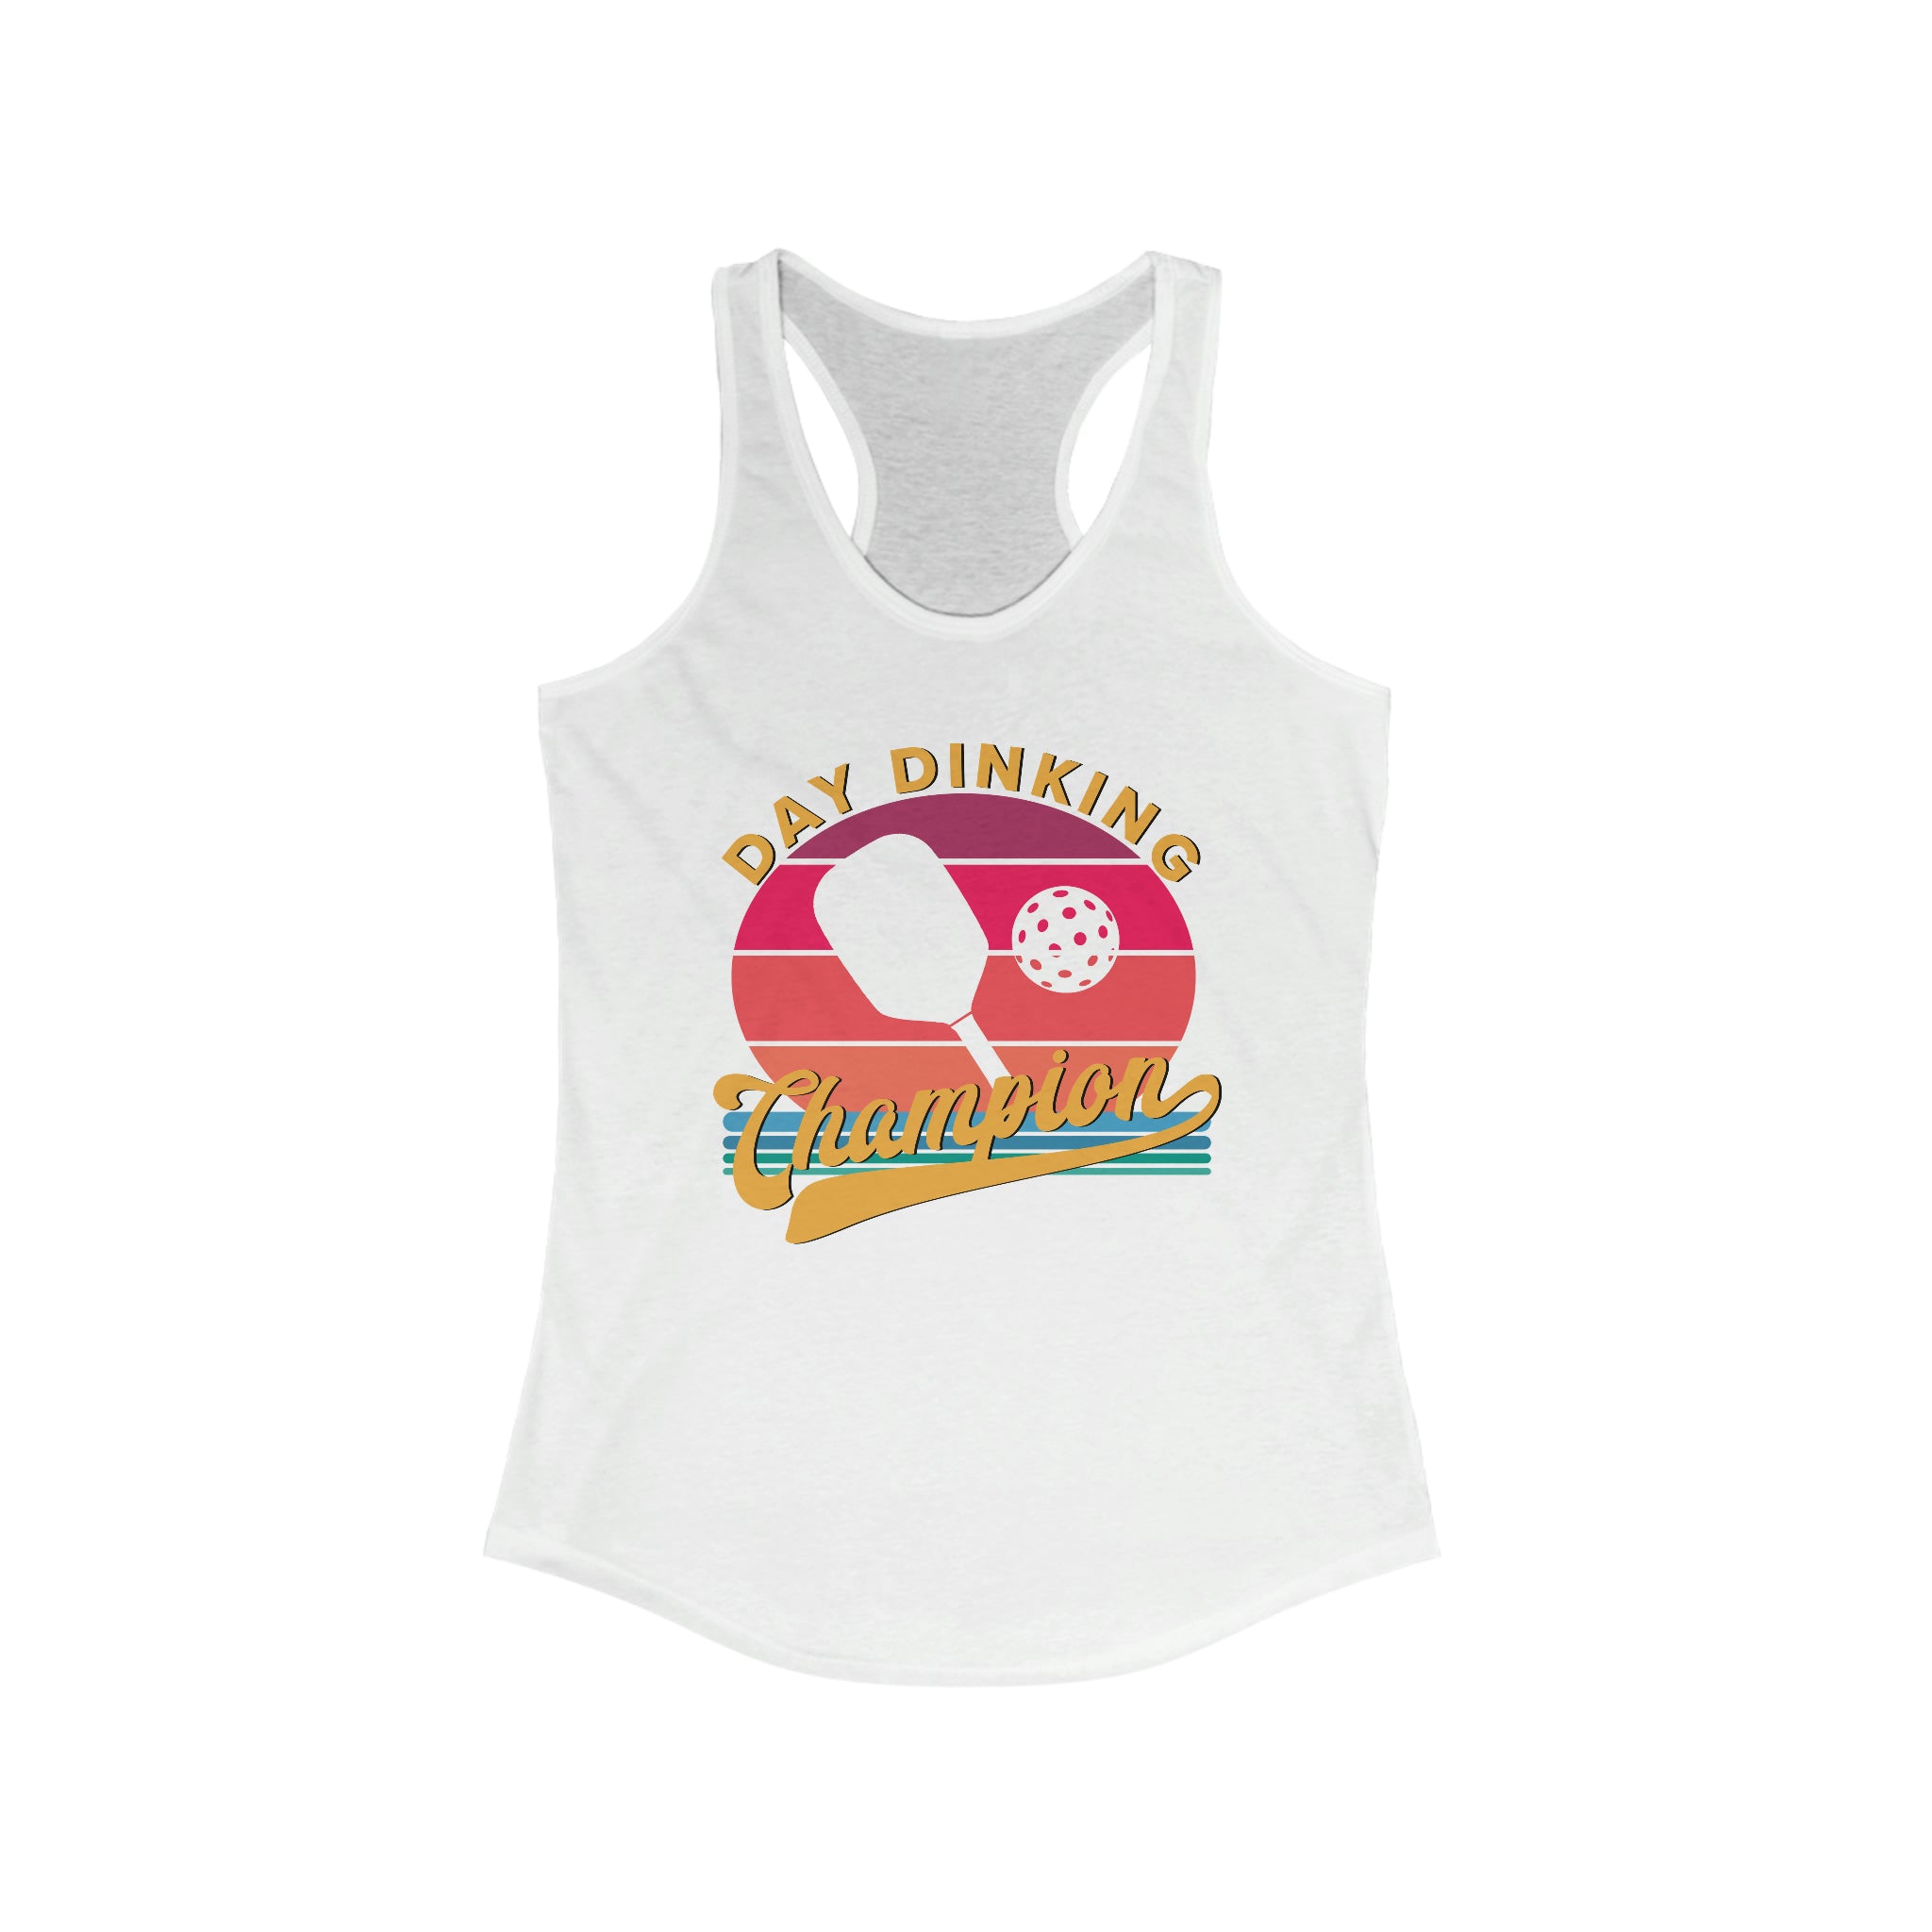 white day dinking champion retro inspired pickleball apparel women's racerback tank top front view